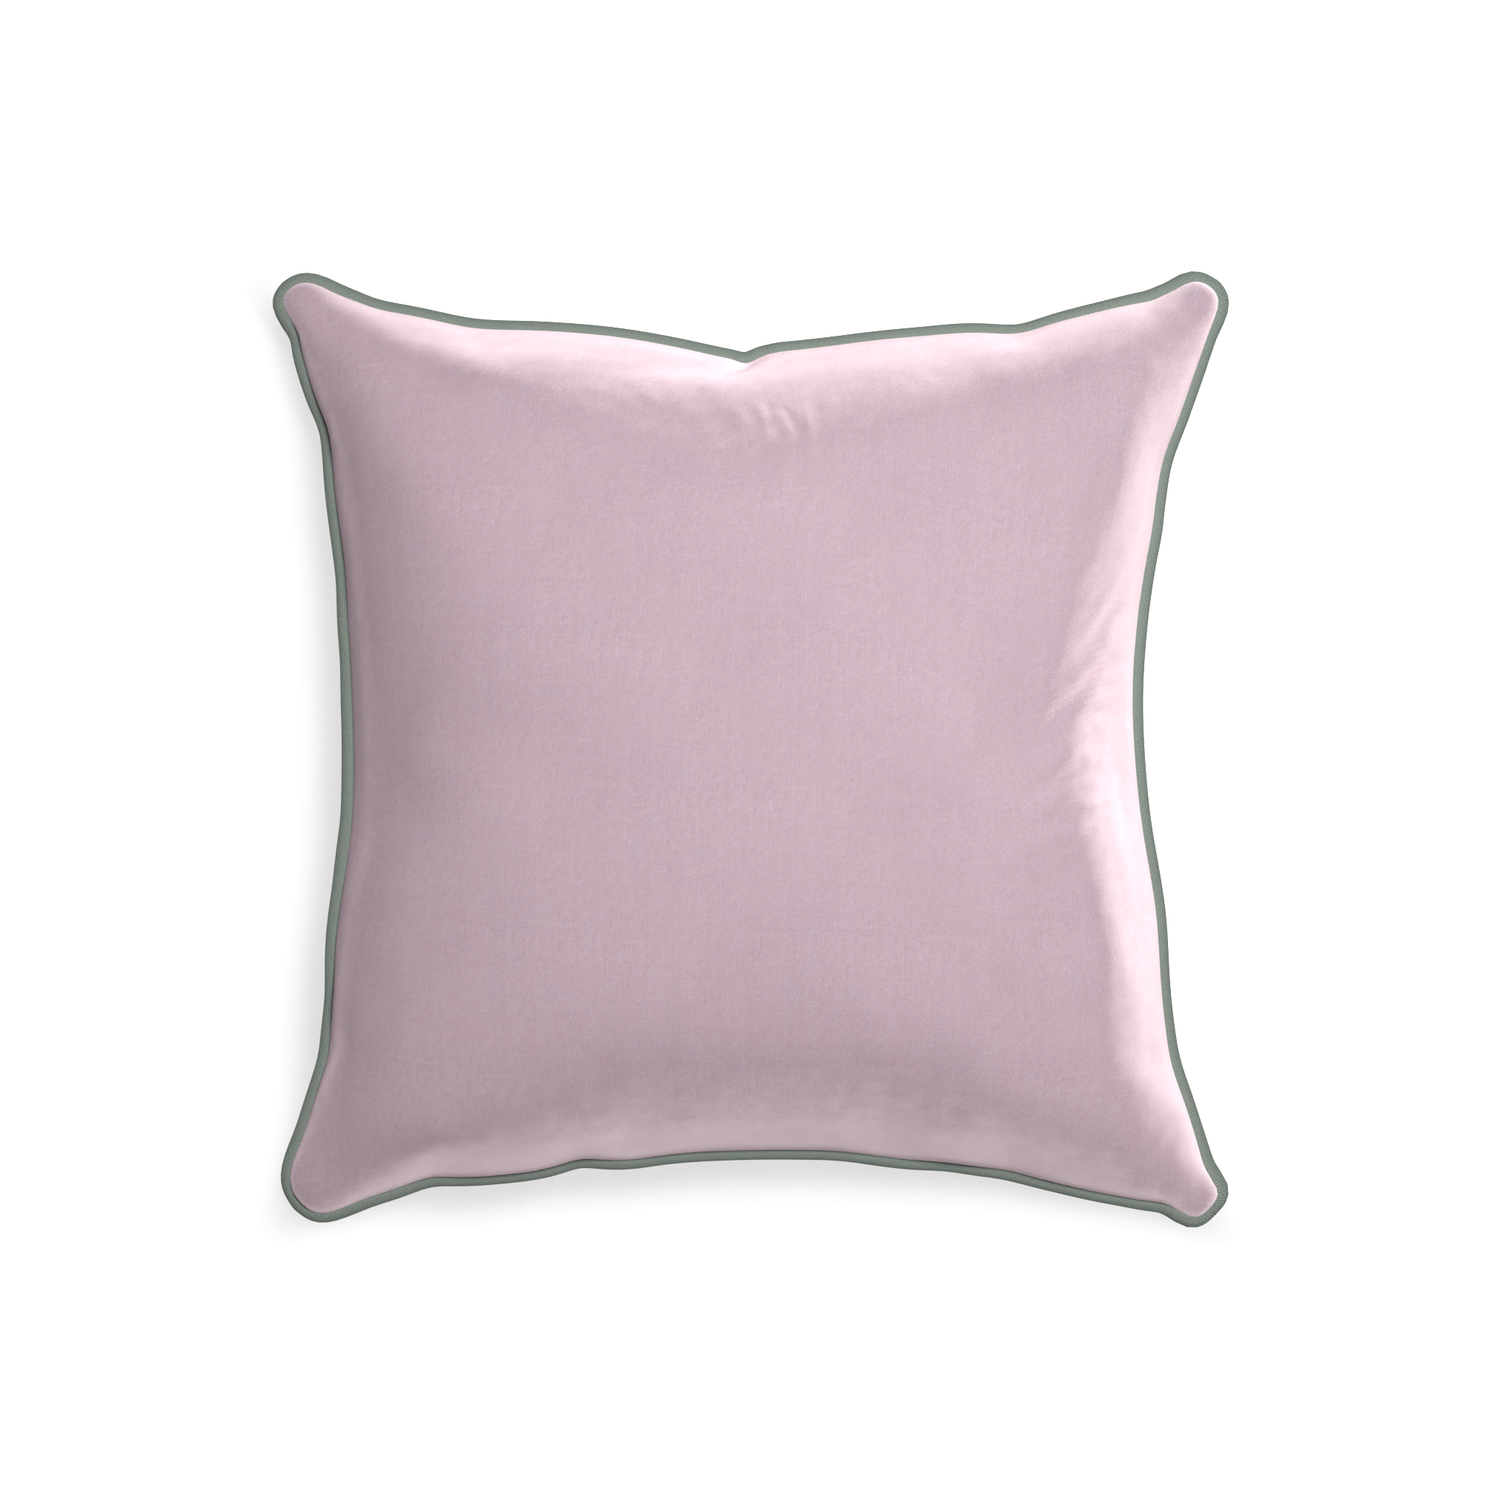 20-square lilac velvet custom lilacpillow with sage piping on white background